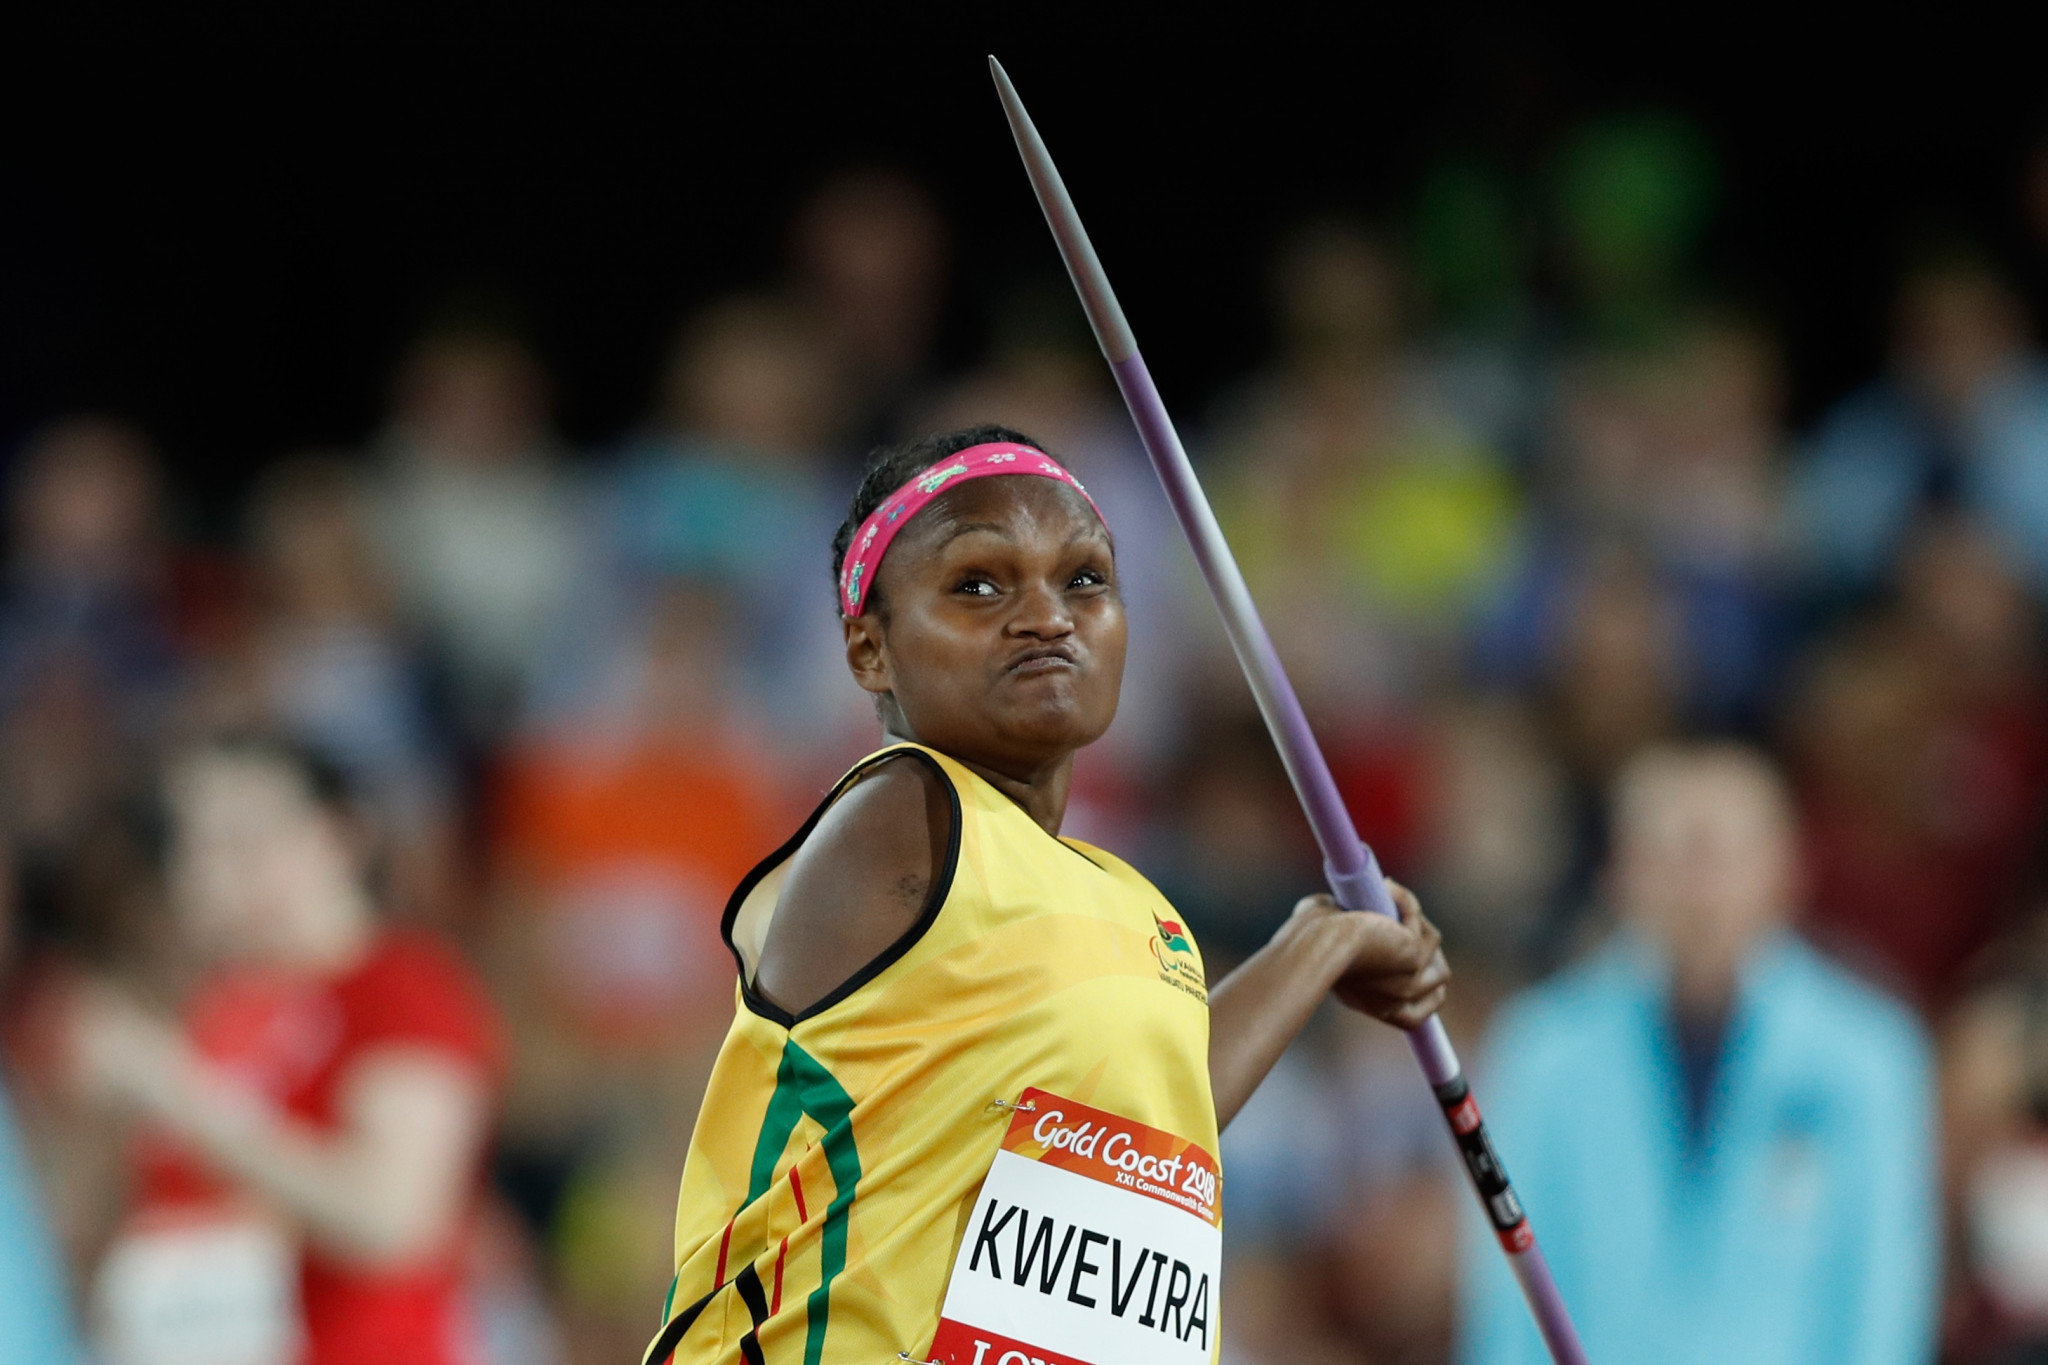 Friana Kwevira became the first athlete from Vanuatu to win a Commonwealth Games medal with women's javelin throw F46 at Gold Coast 2018 ©Getty Images